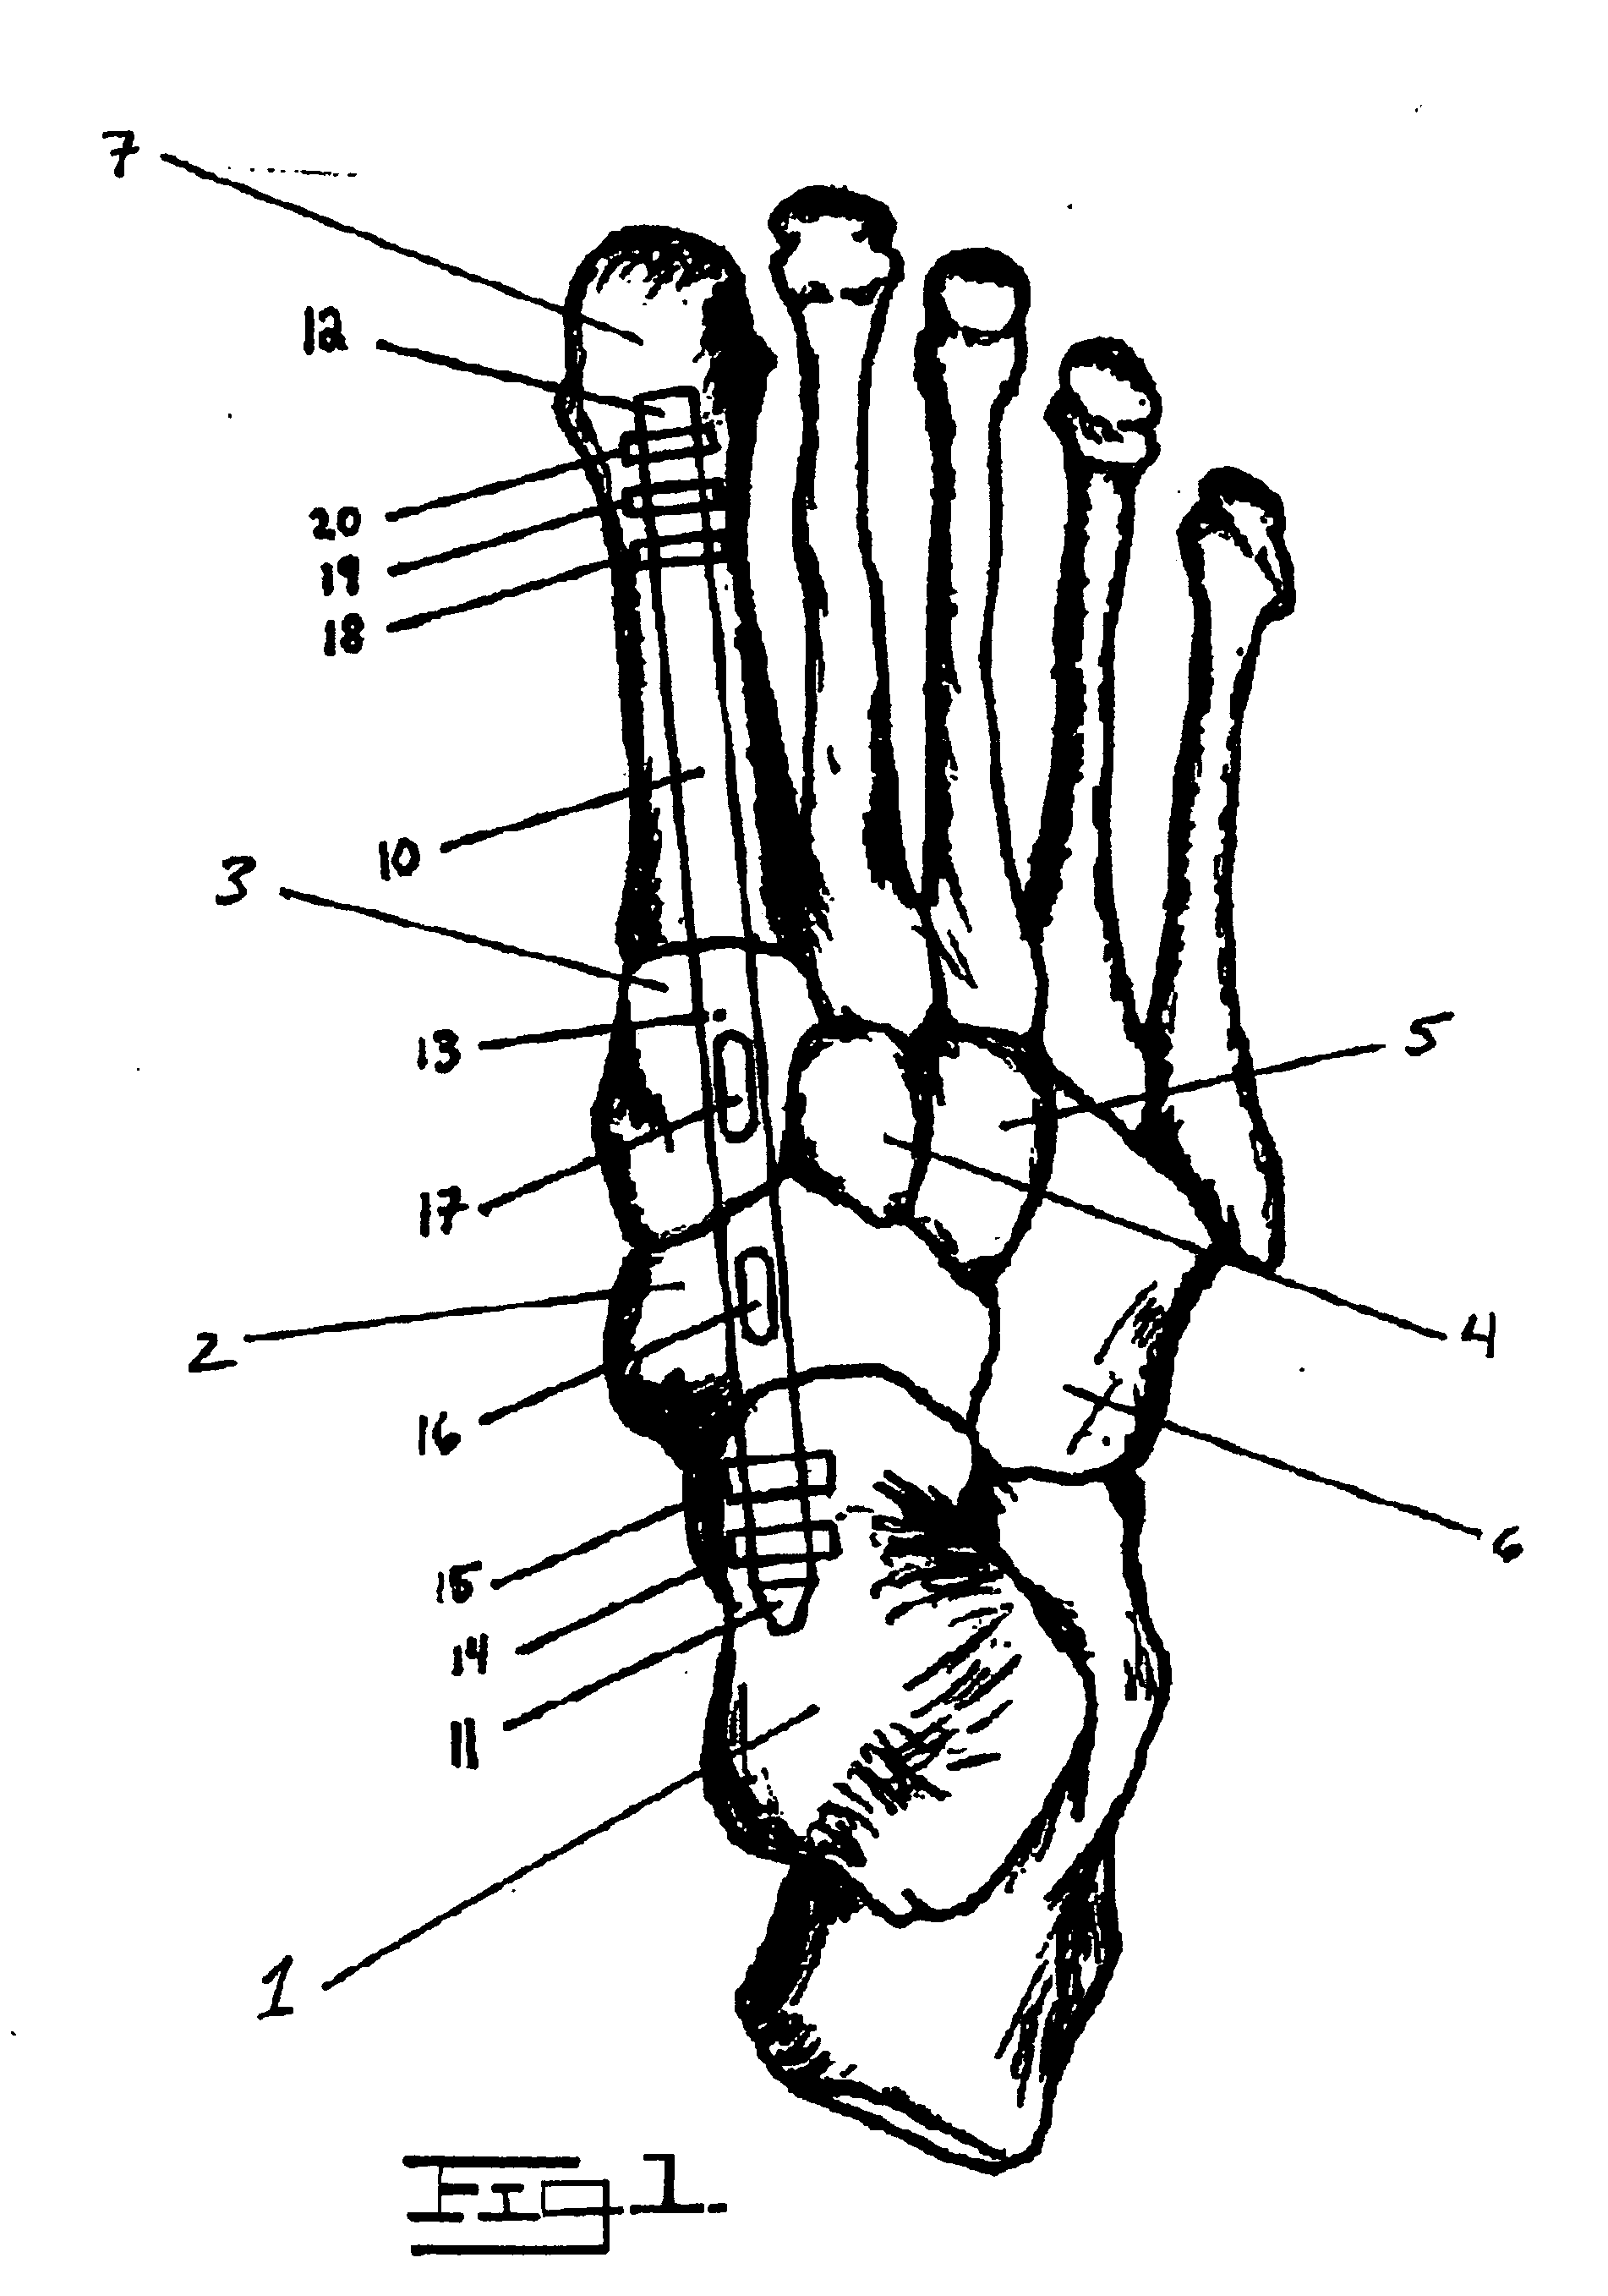 Method and apparatus for repairing the mid-food region via an intramedullary nail